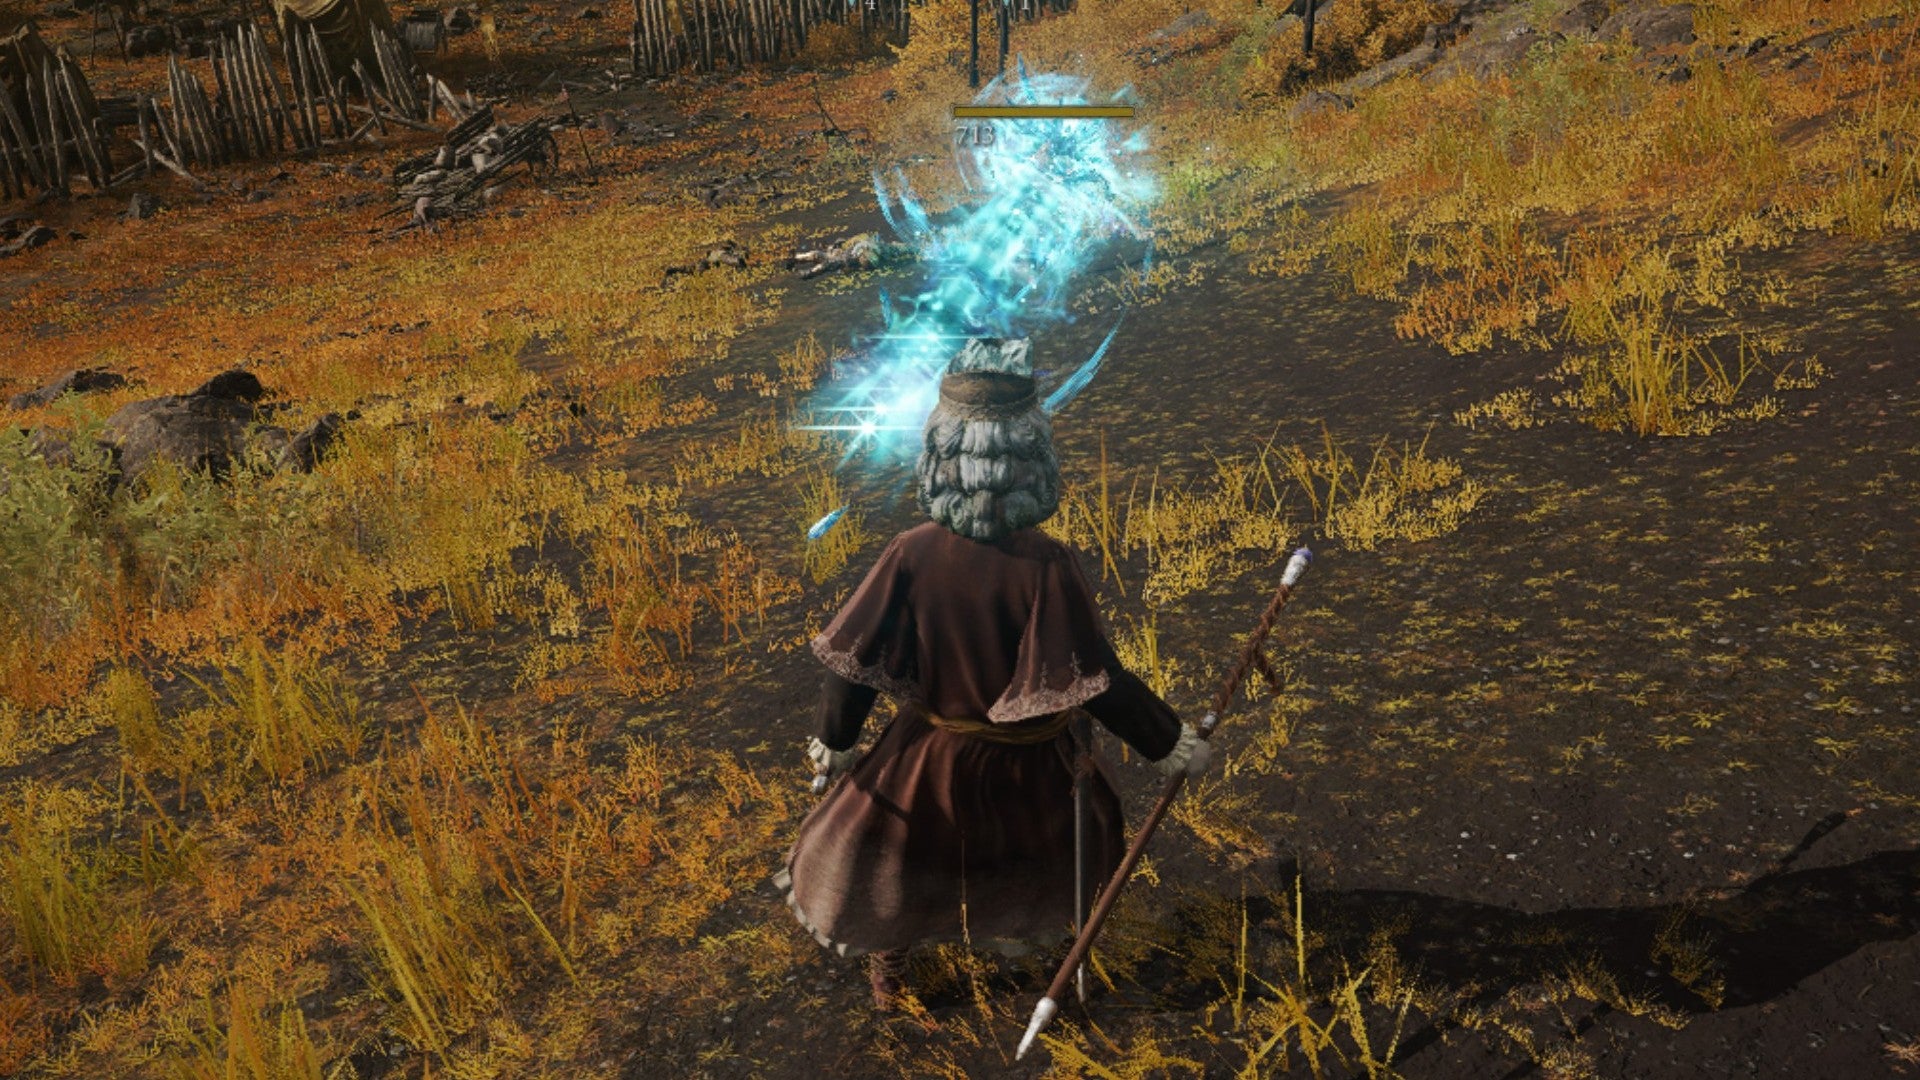 Elden Ring sorcerer blasting a comet at an enemy on a hill